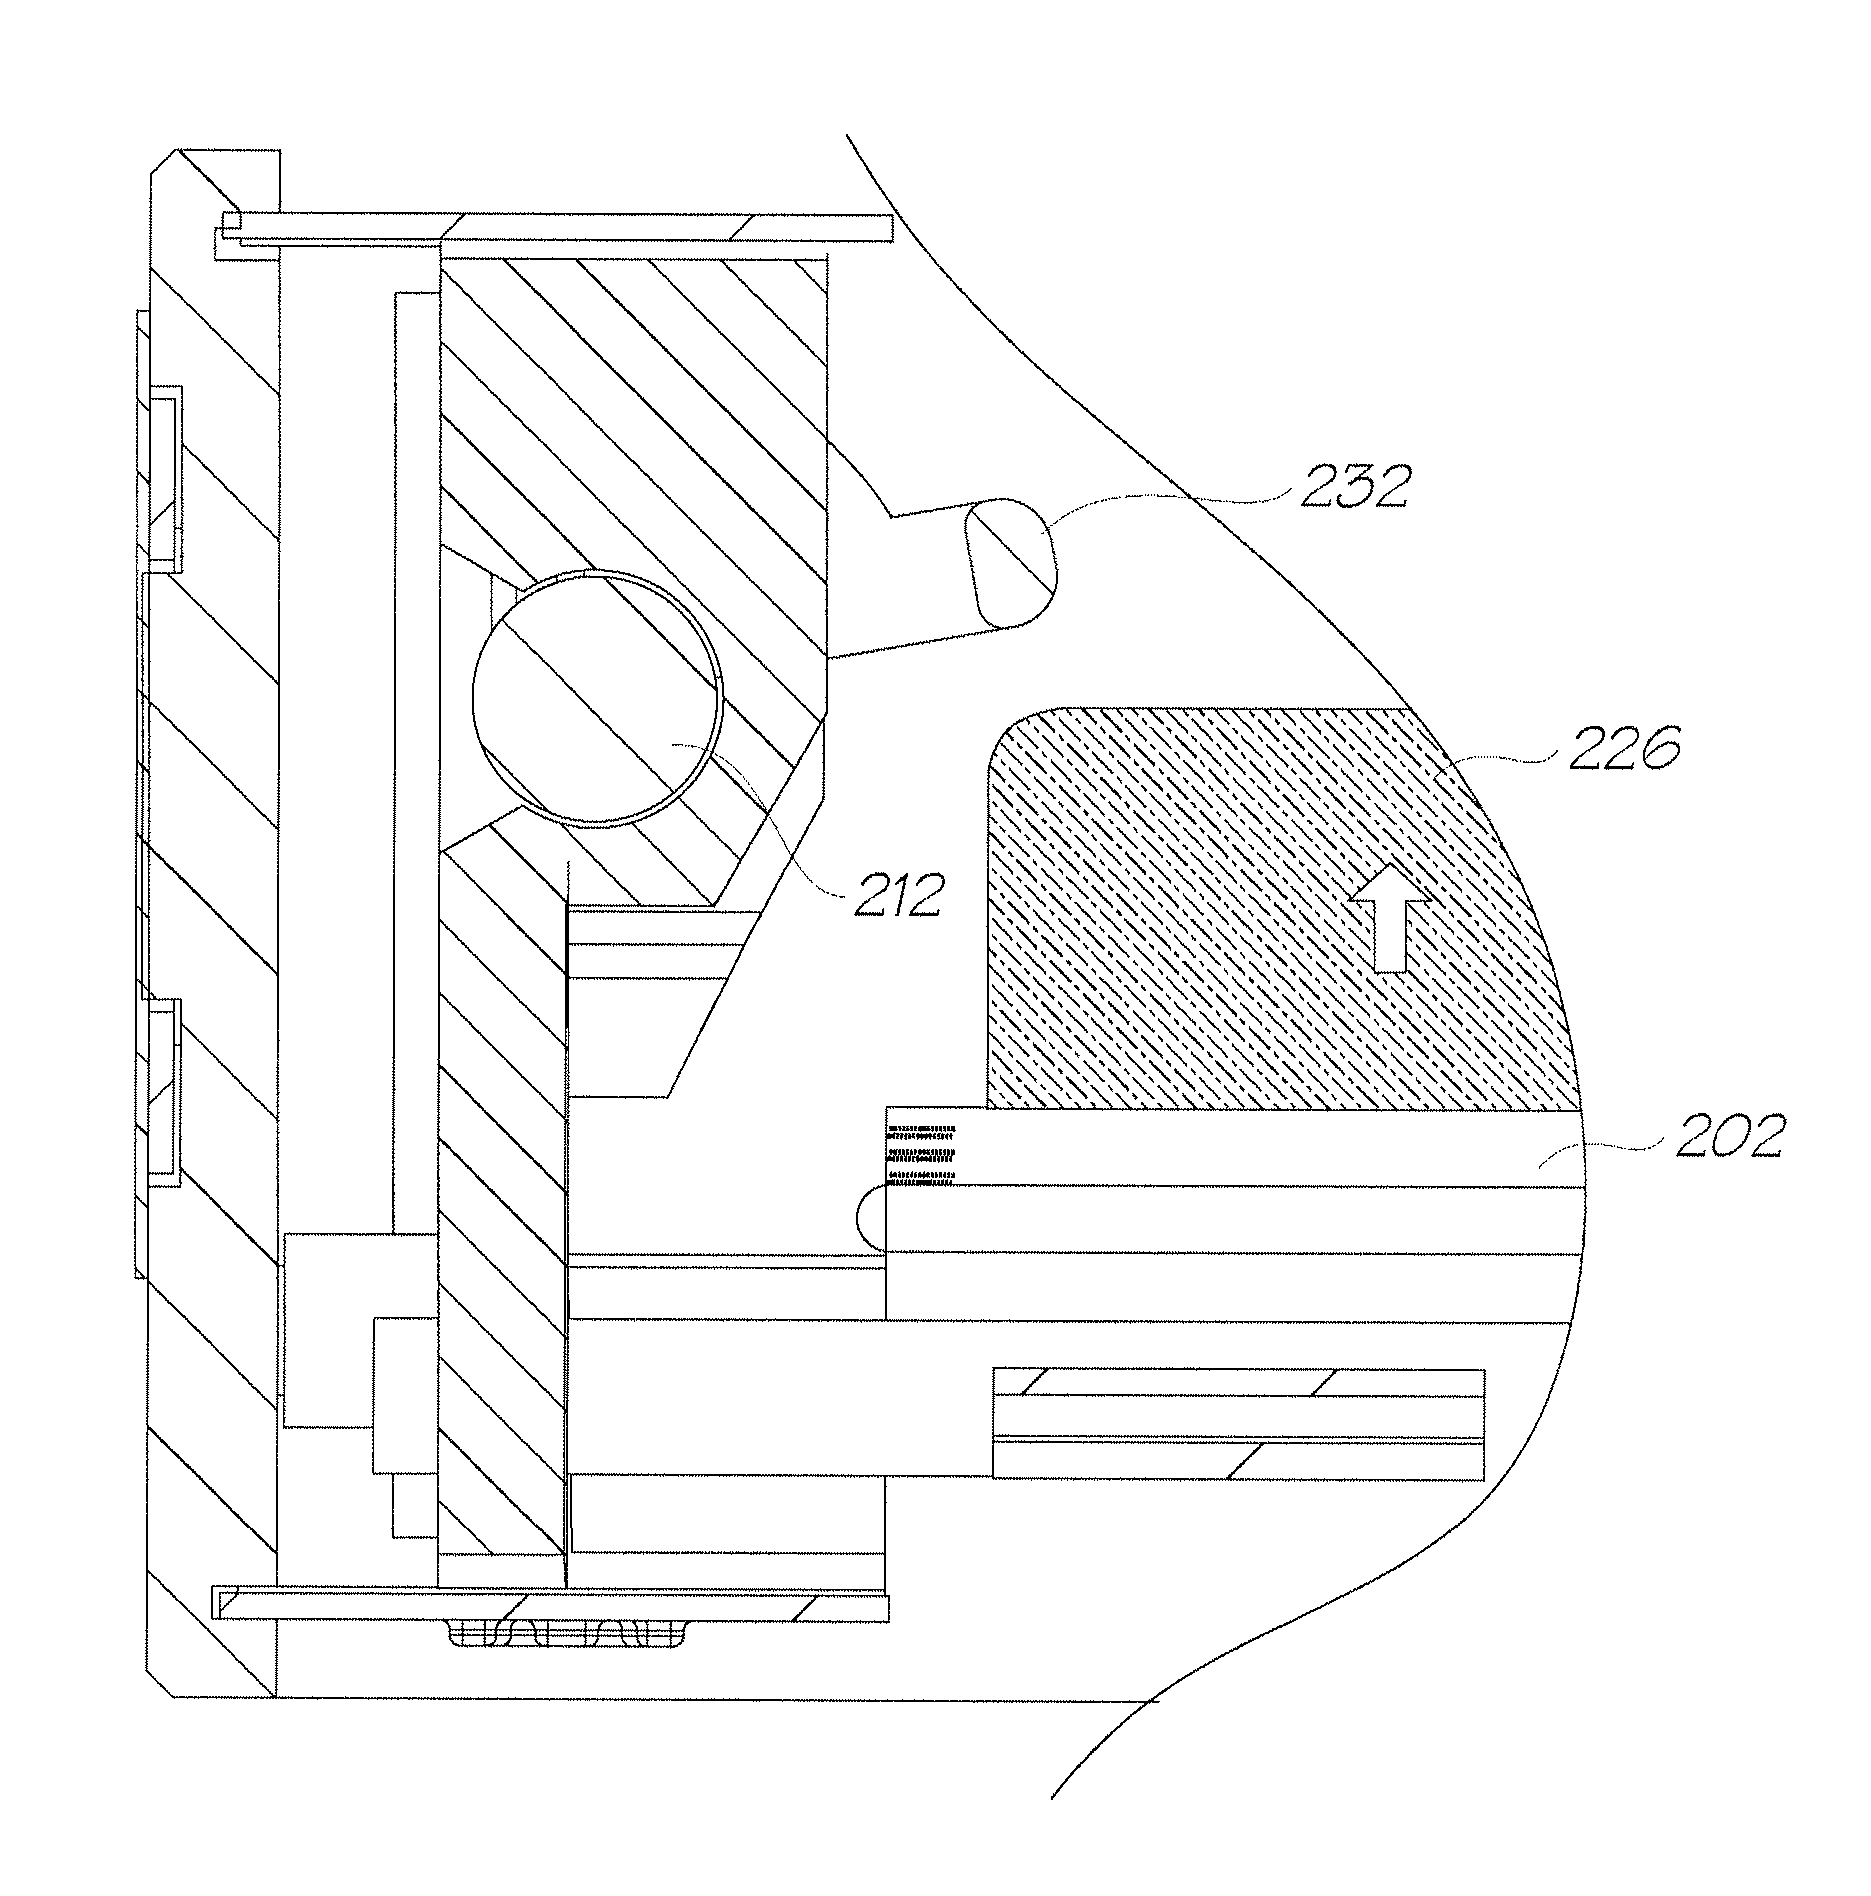 Print assembly for a mobile telecommunications device with capping structure